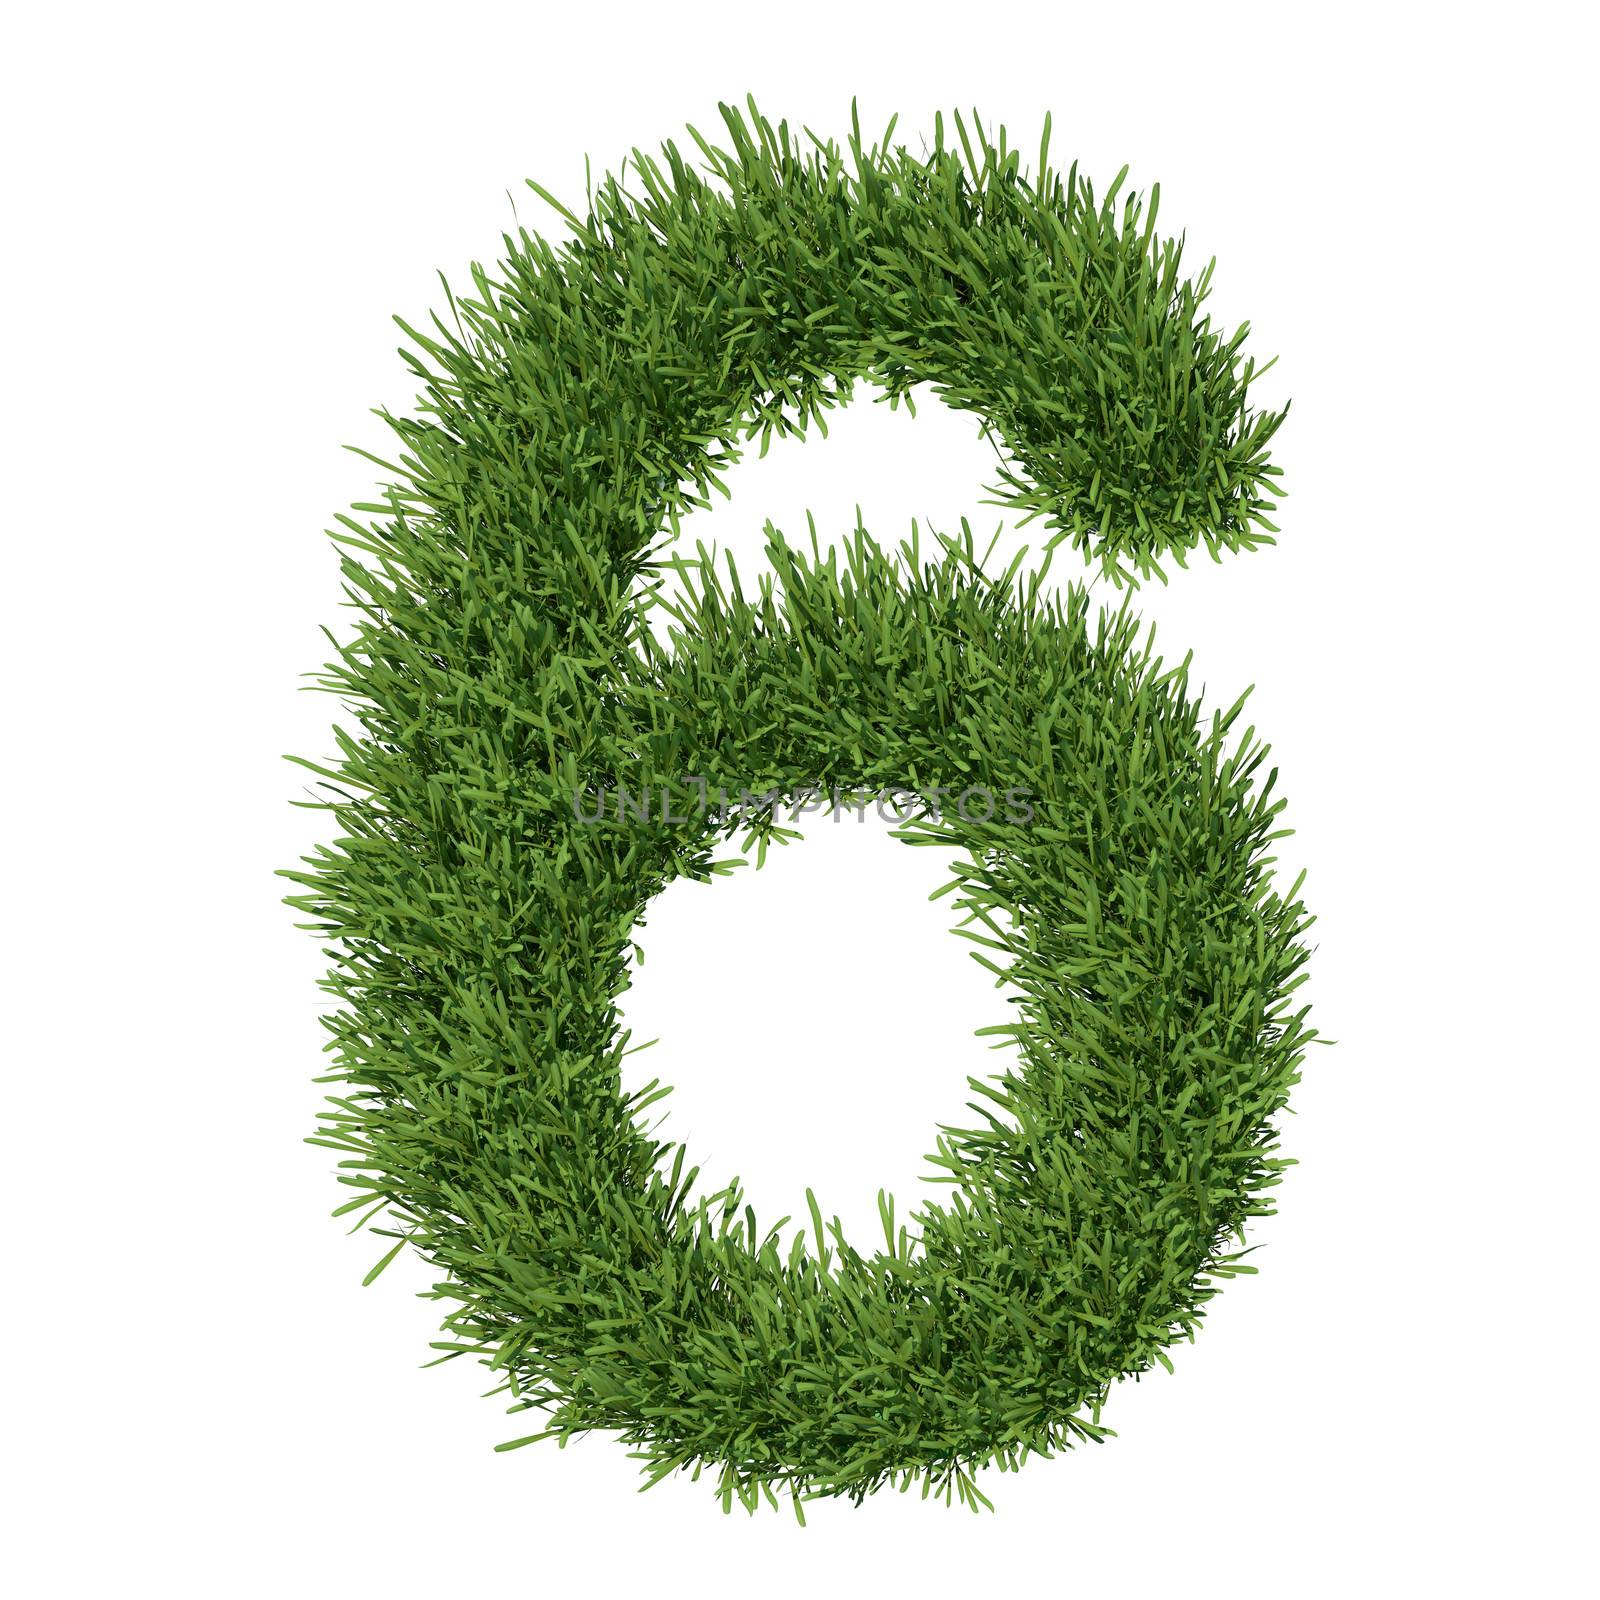 Arabic numeral made of grass. Isolated render on a white background